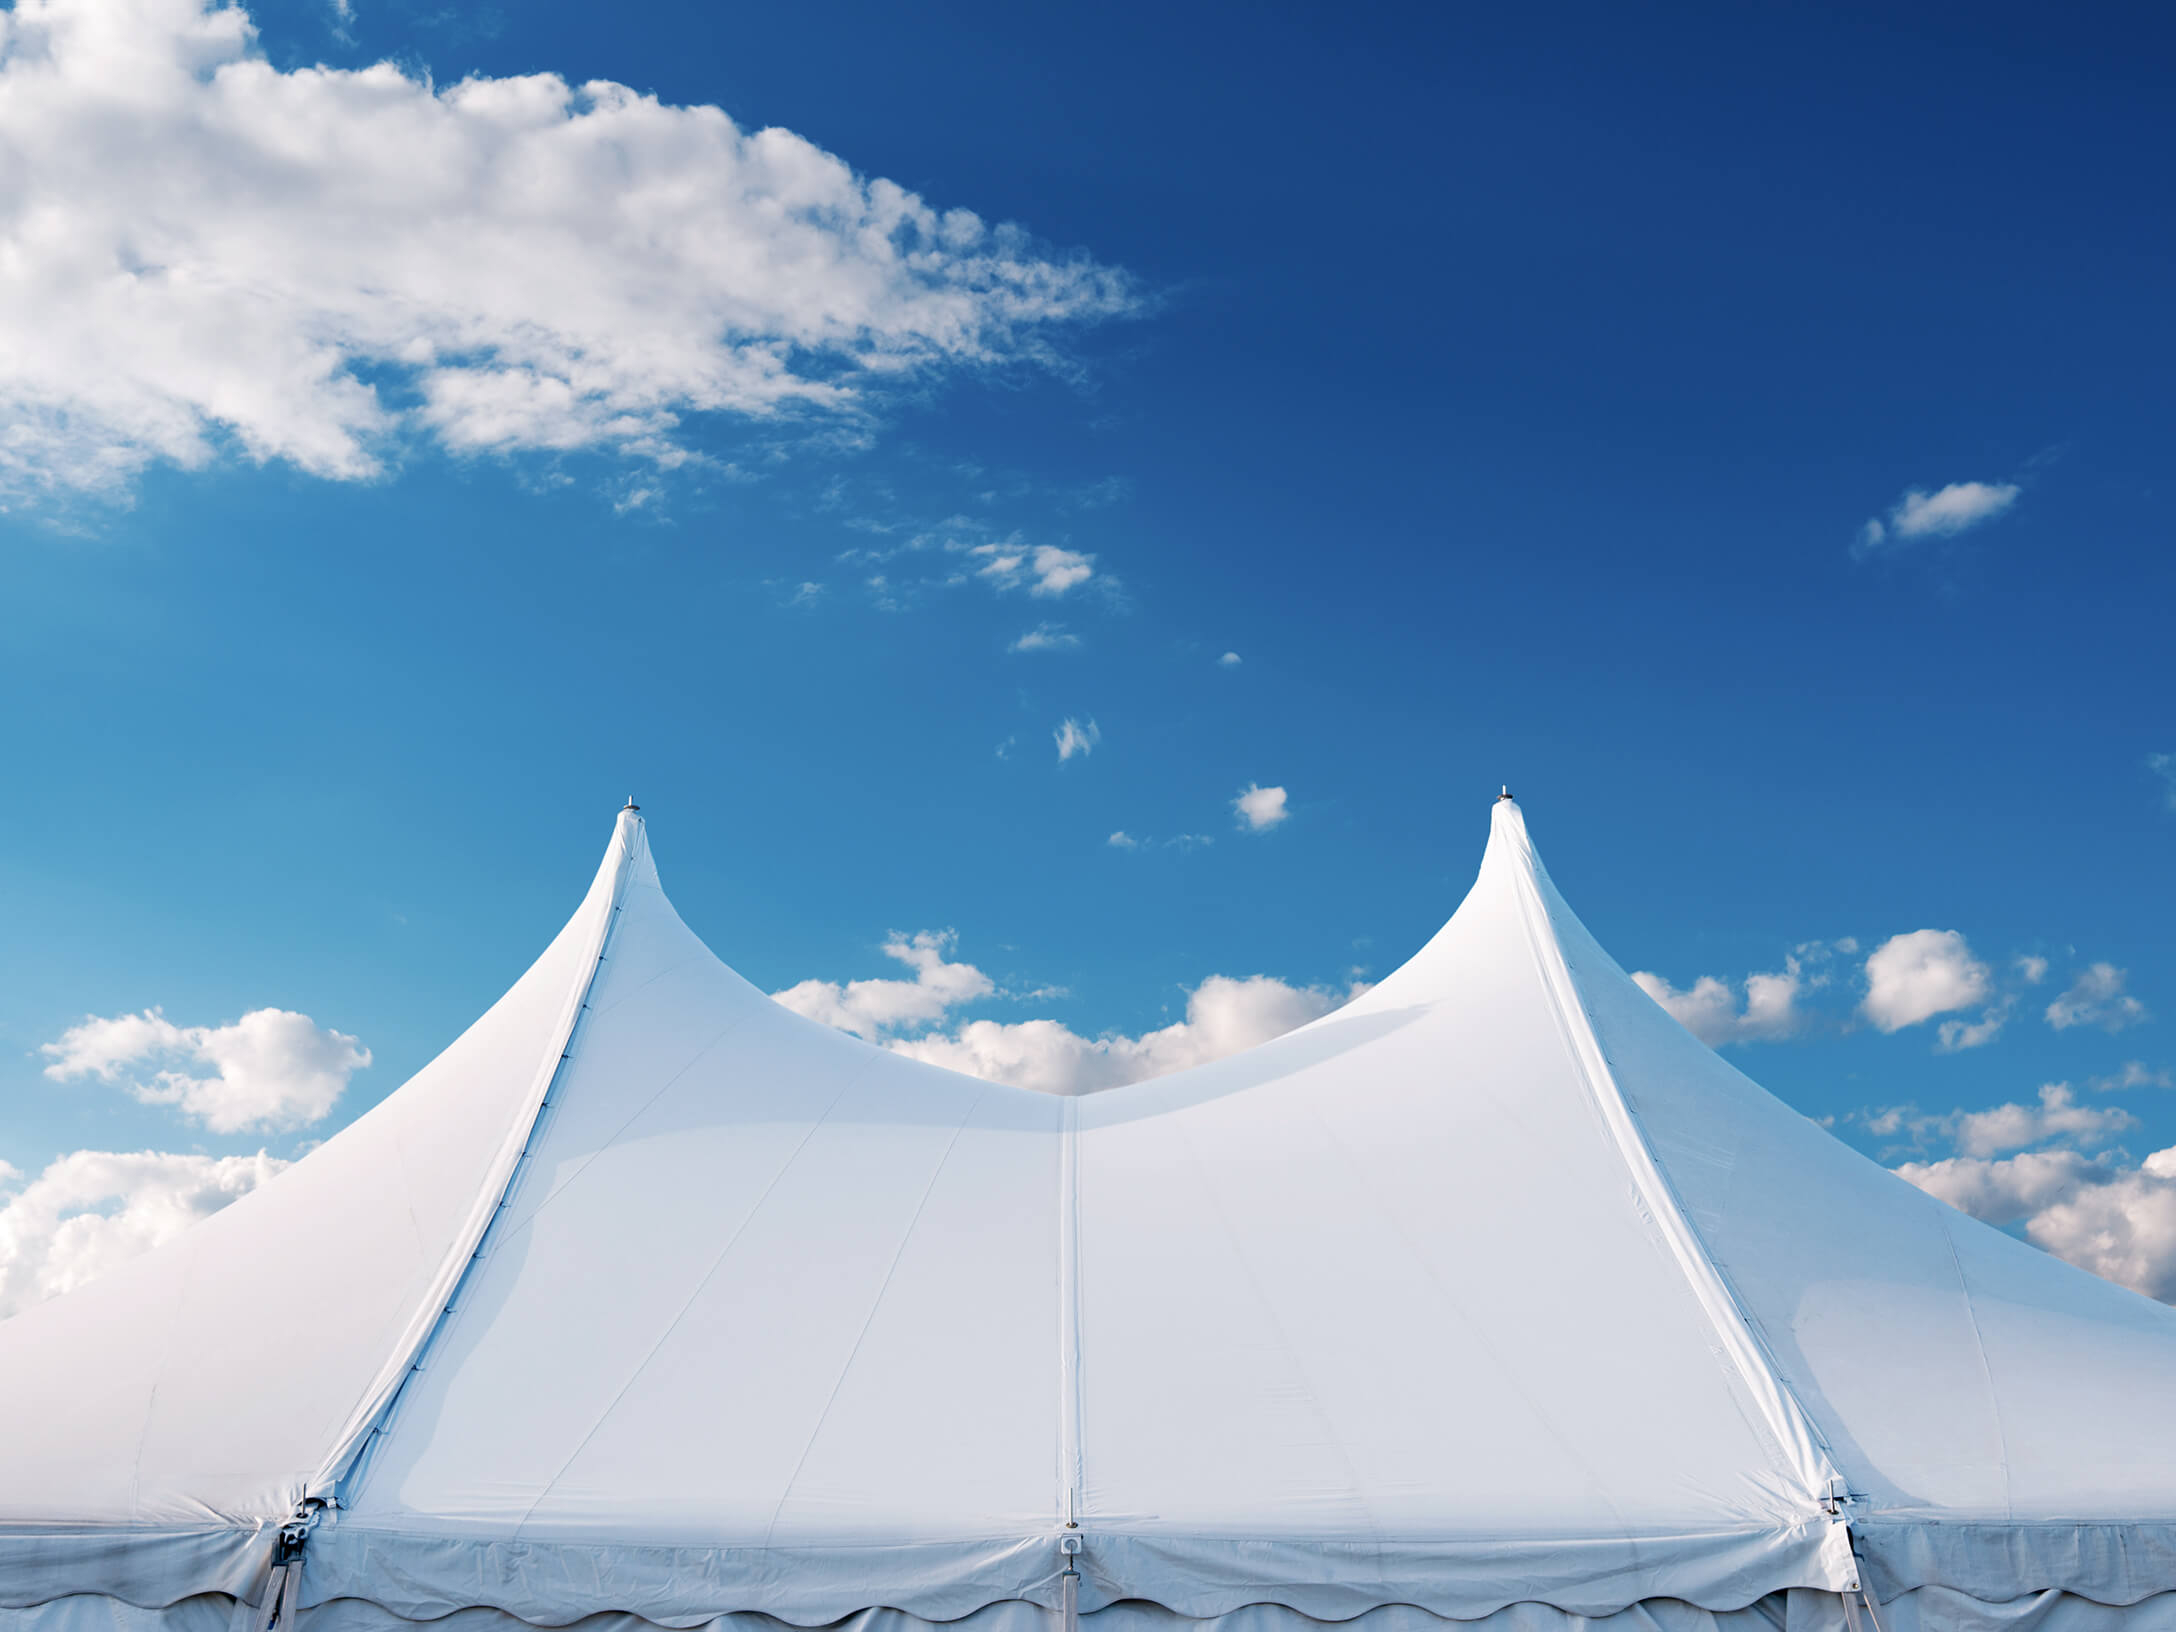 Where to buy commercial grade tents